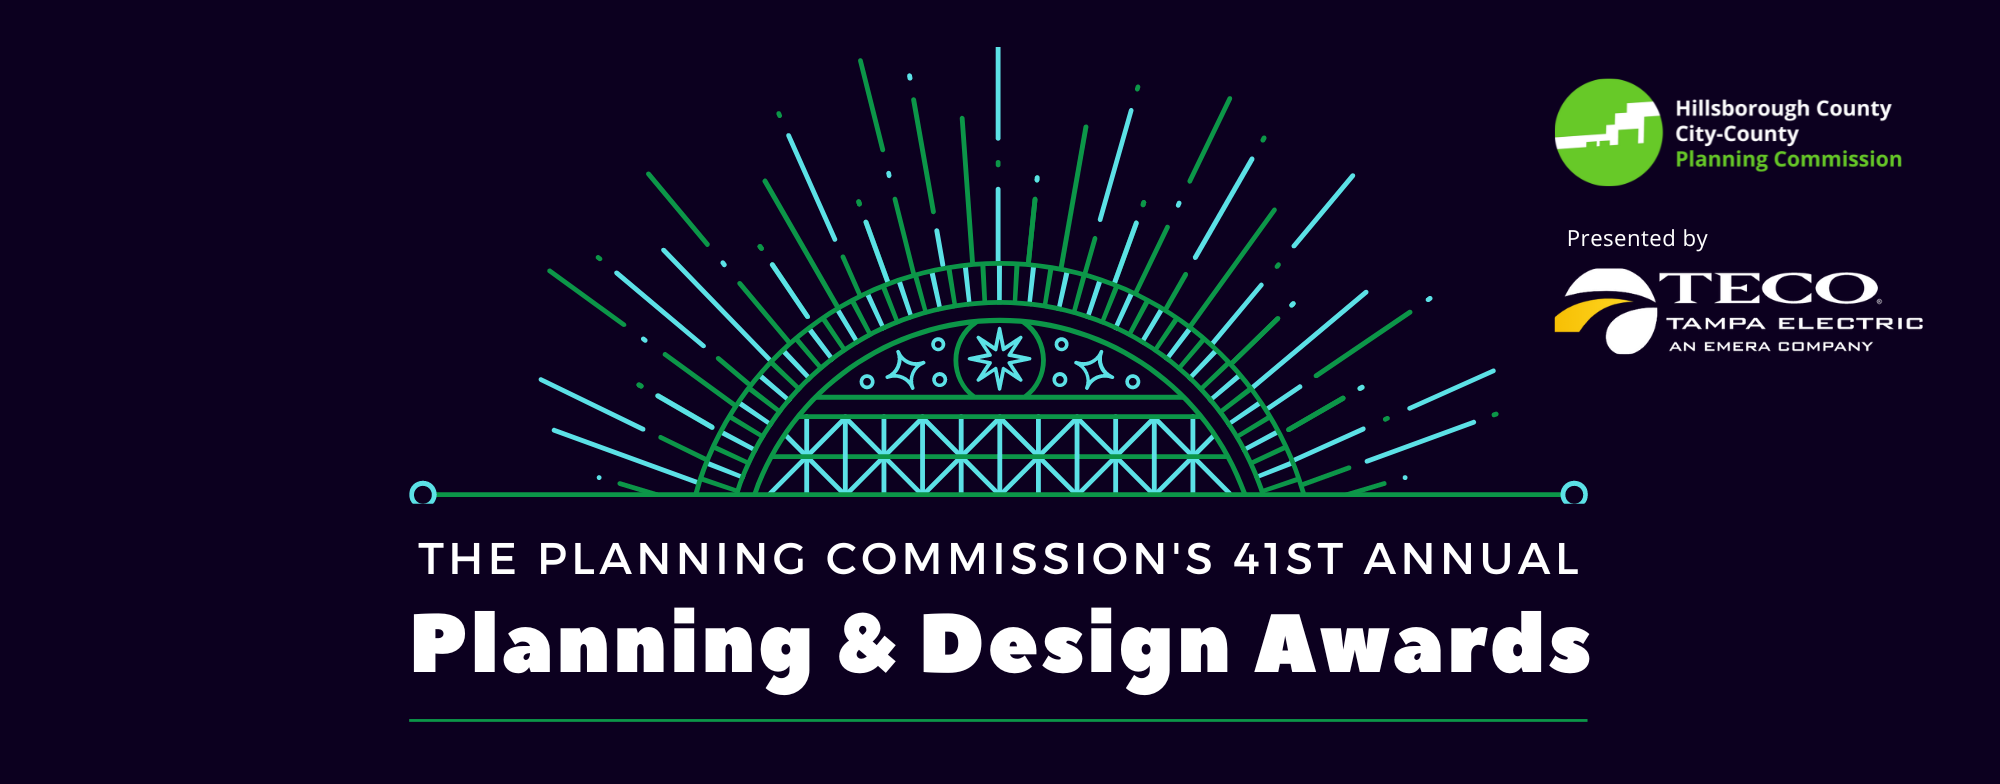 The Planning Commission's 41st Annual Planning & Design Awards